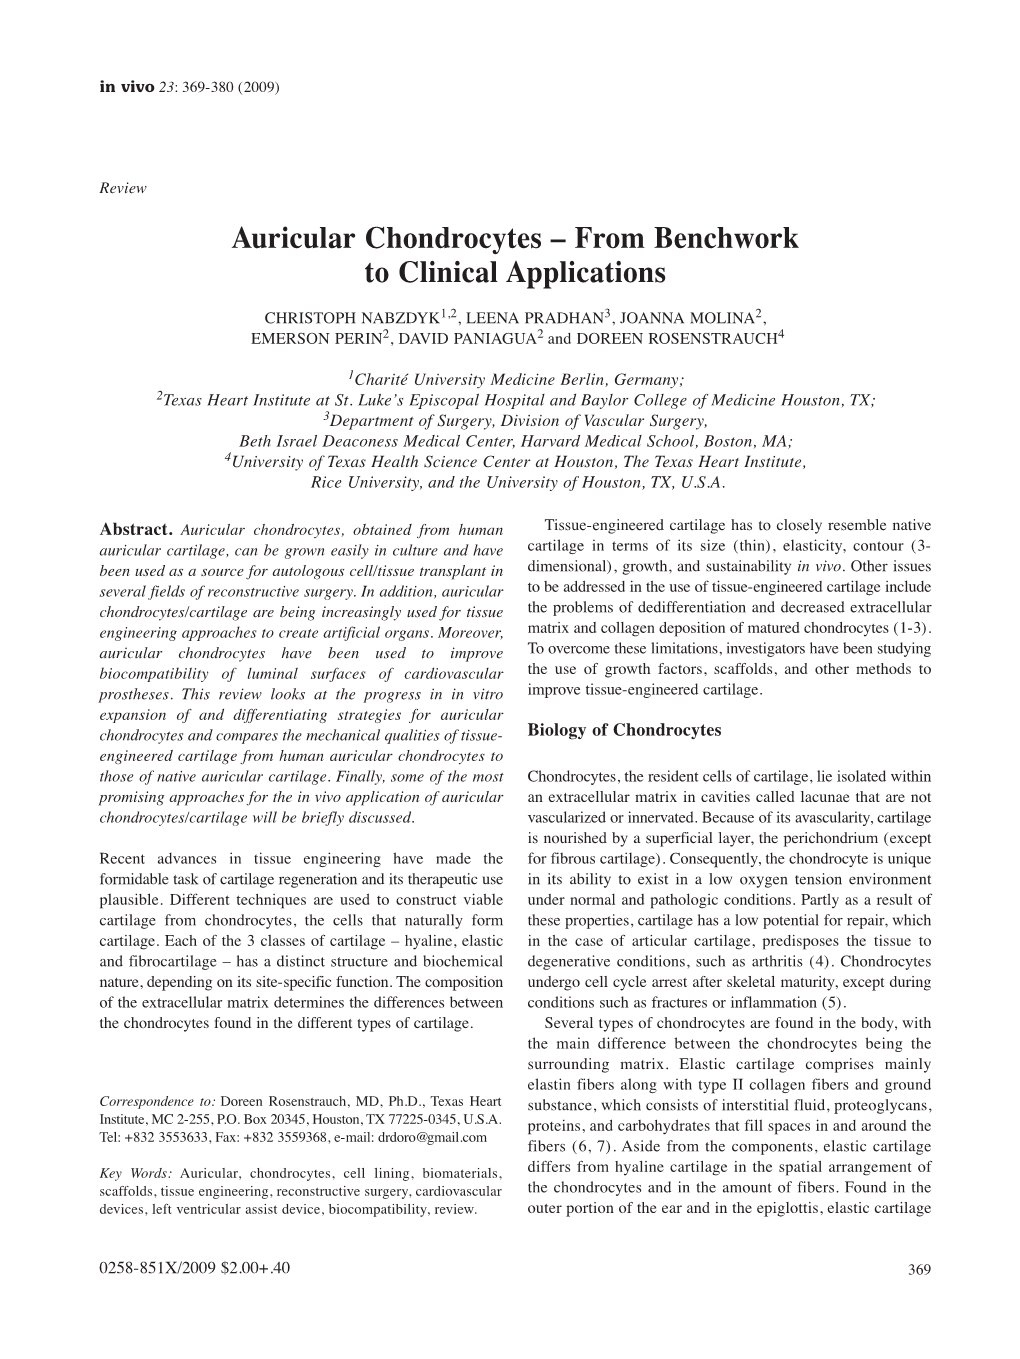 Auricular Chondrocytes – from Benchwork to Clinical Applications